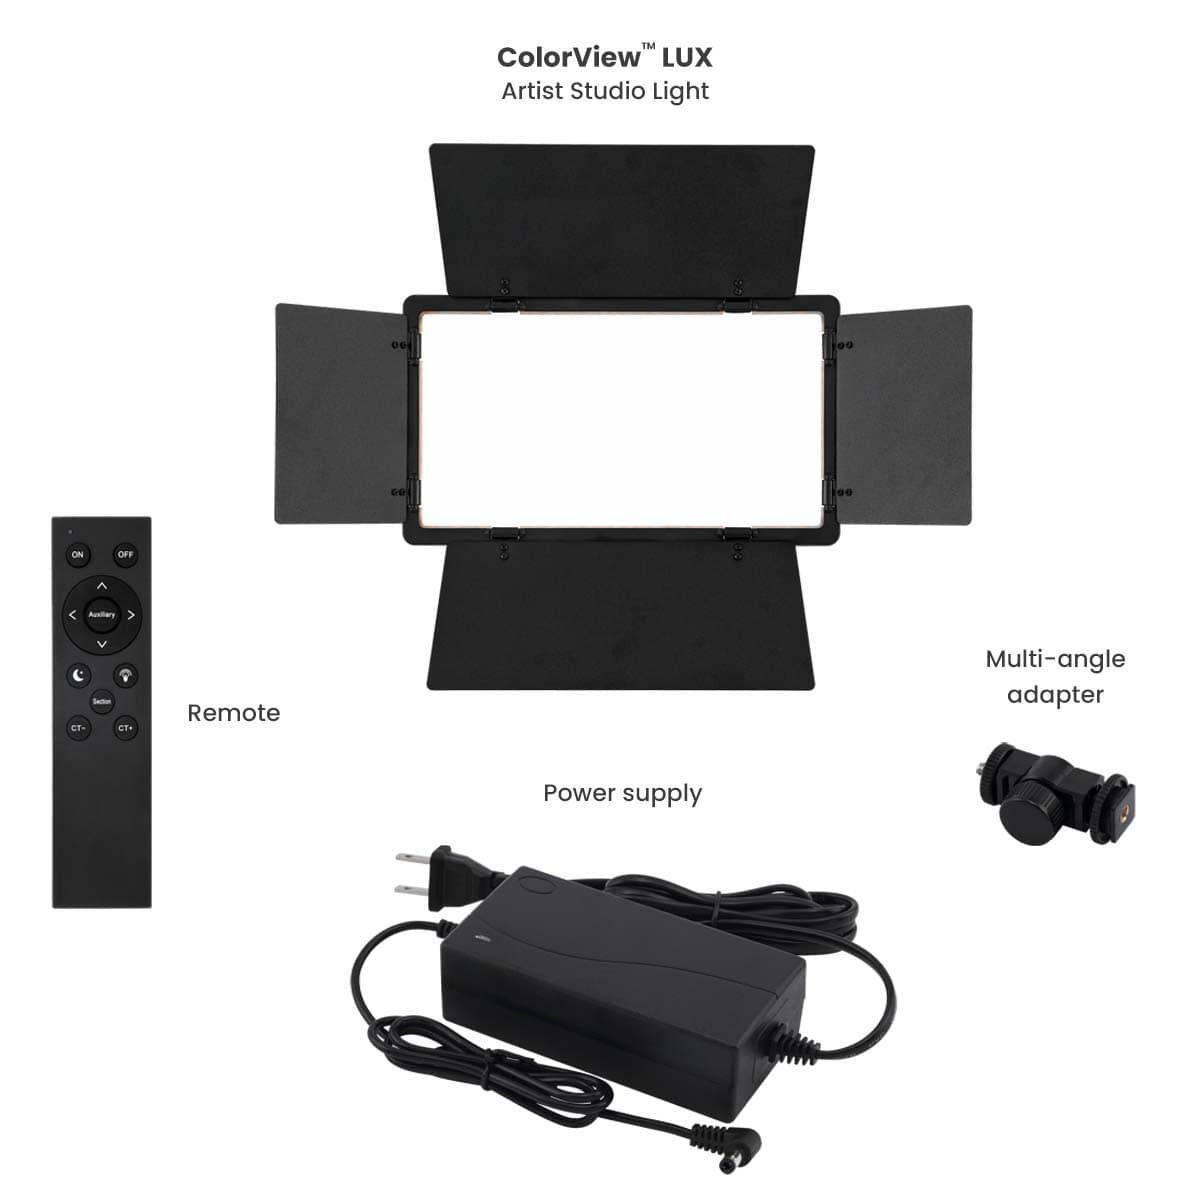 ColorView Lux studio light with remote control and power supply